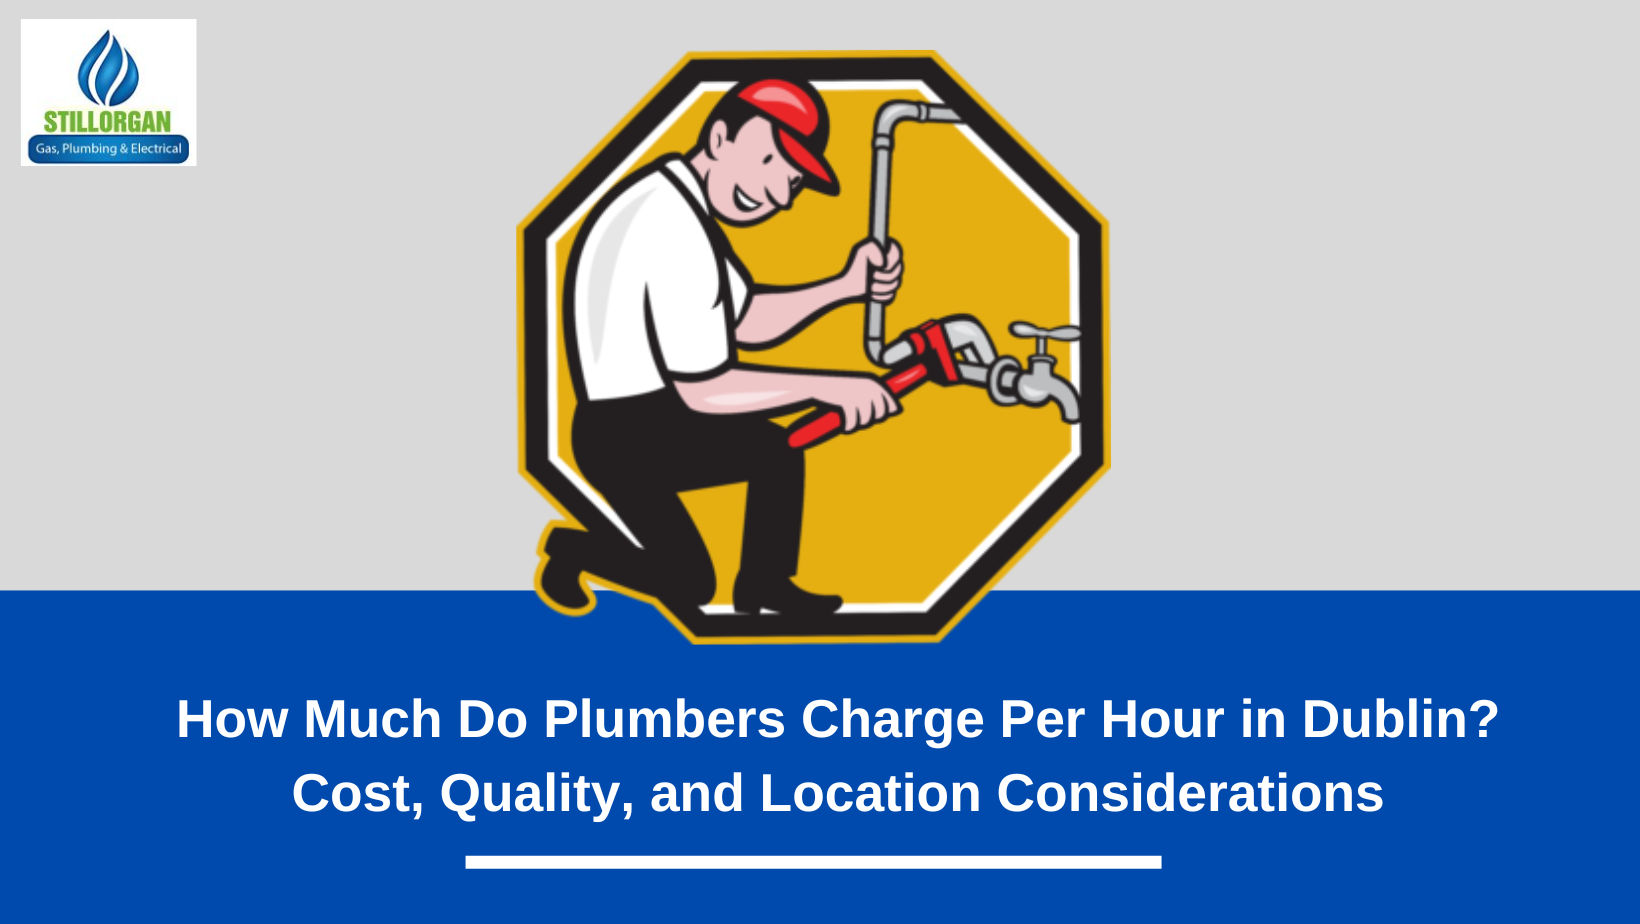 How Much Do Plumbers Charge Per Hour in Dublin